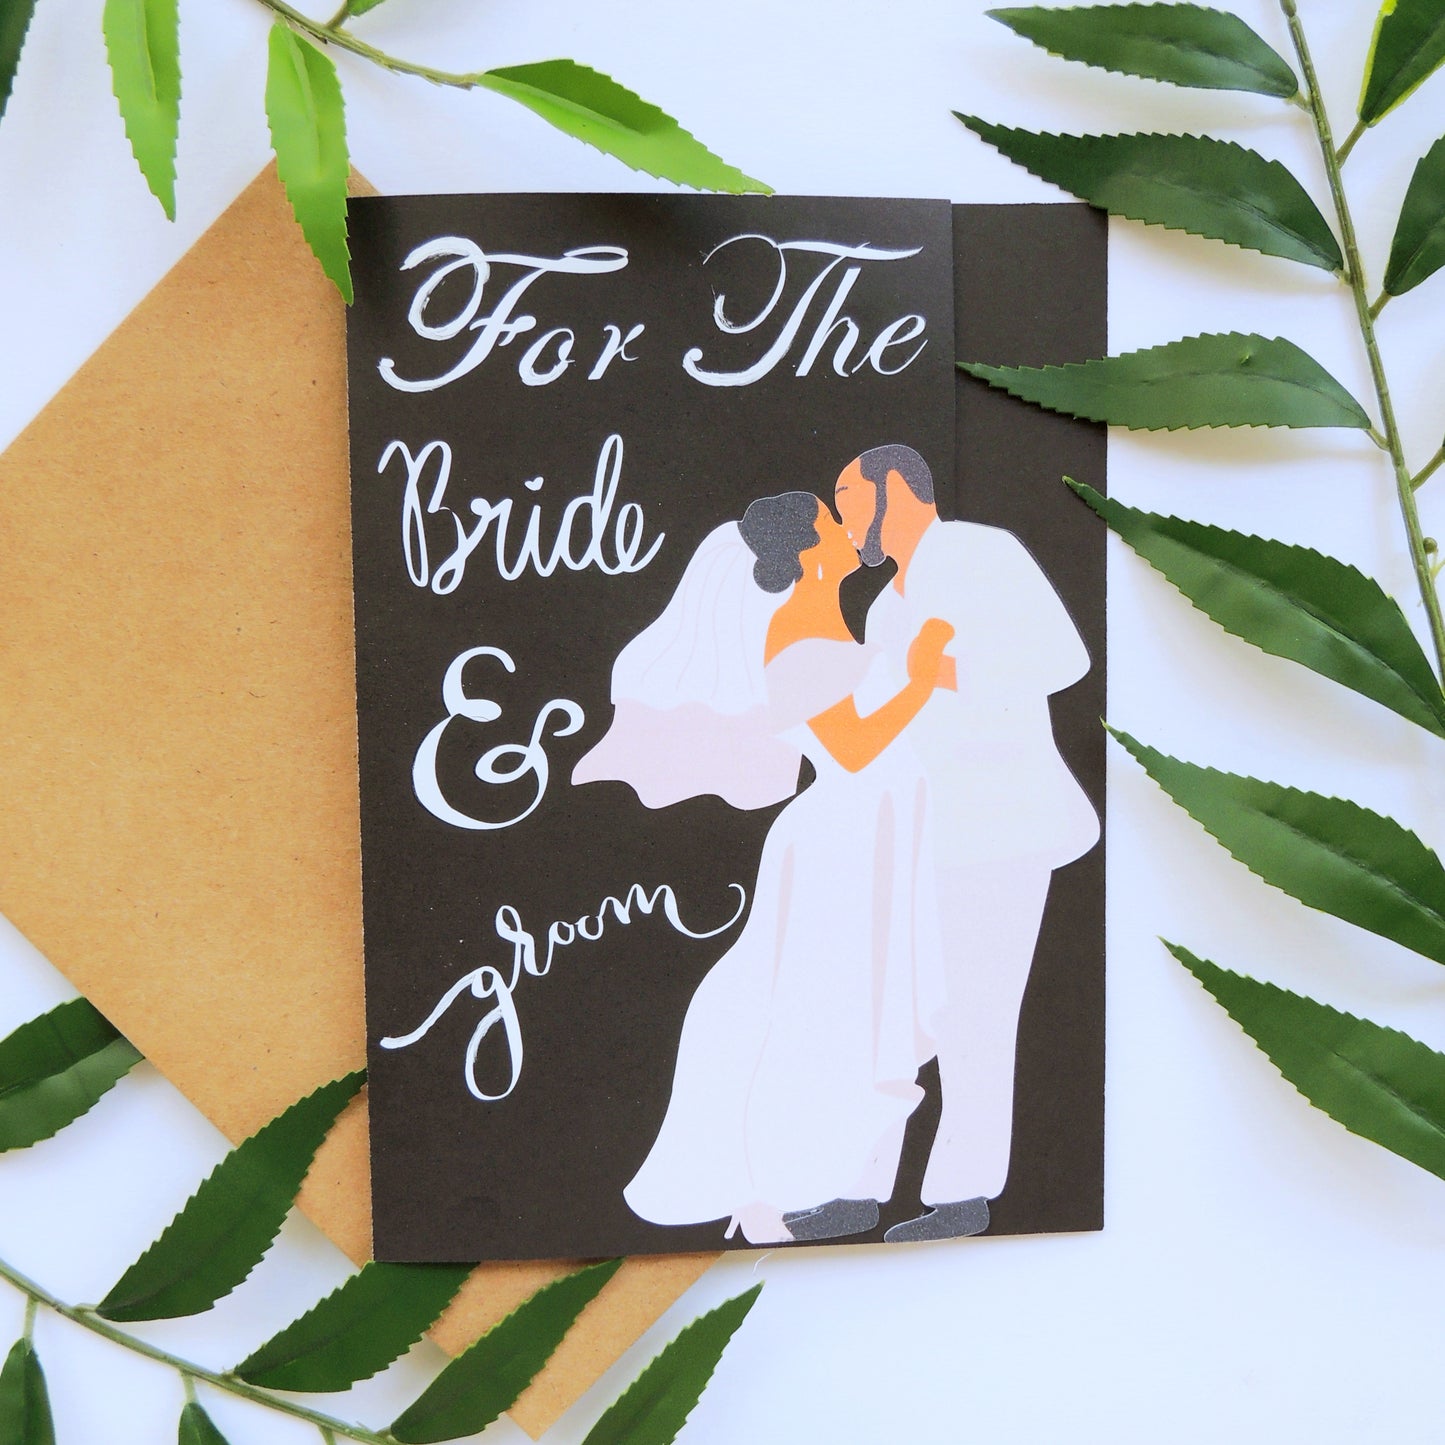 For The Bride & Groom Greeting Card